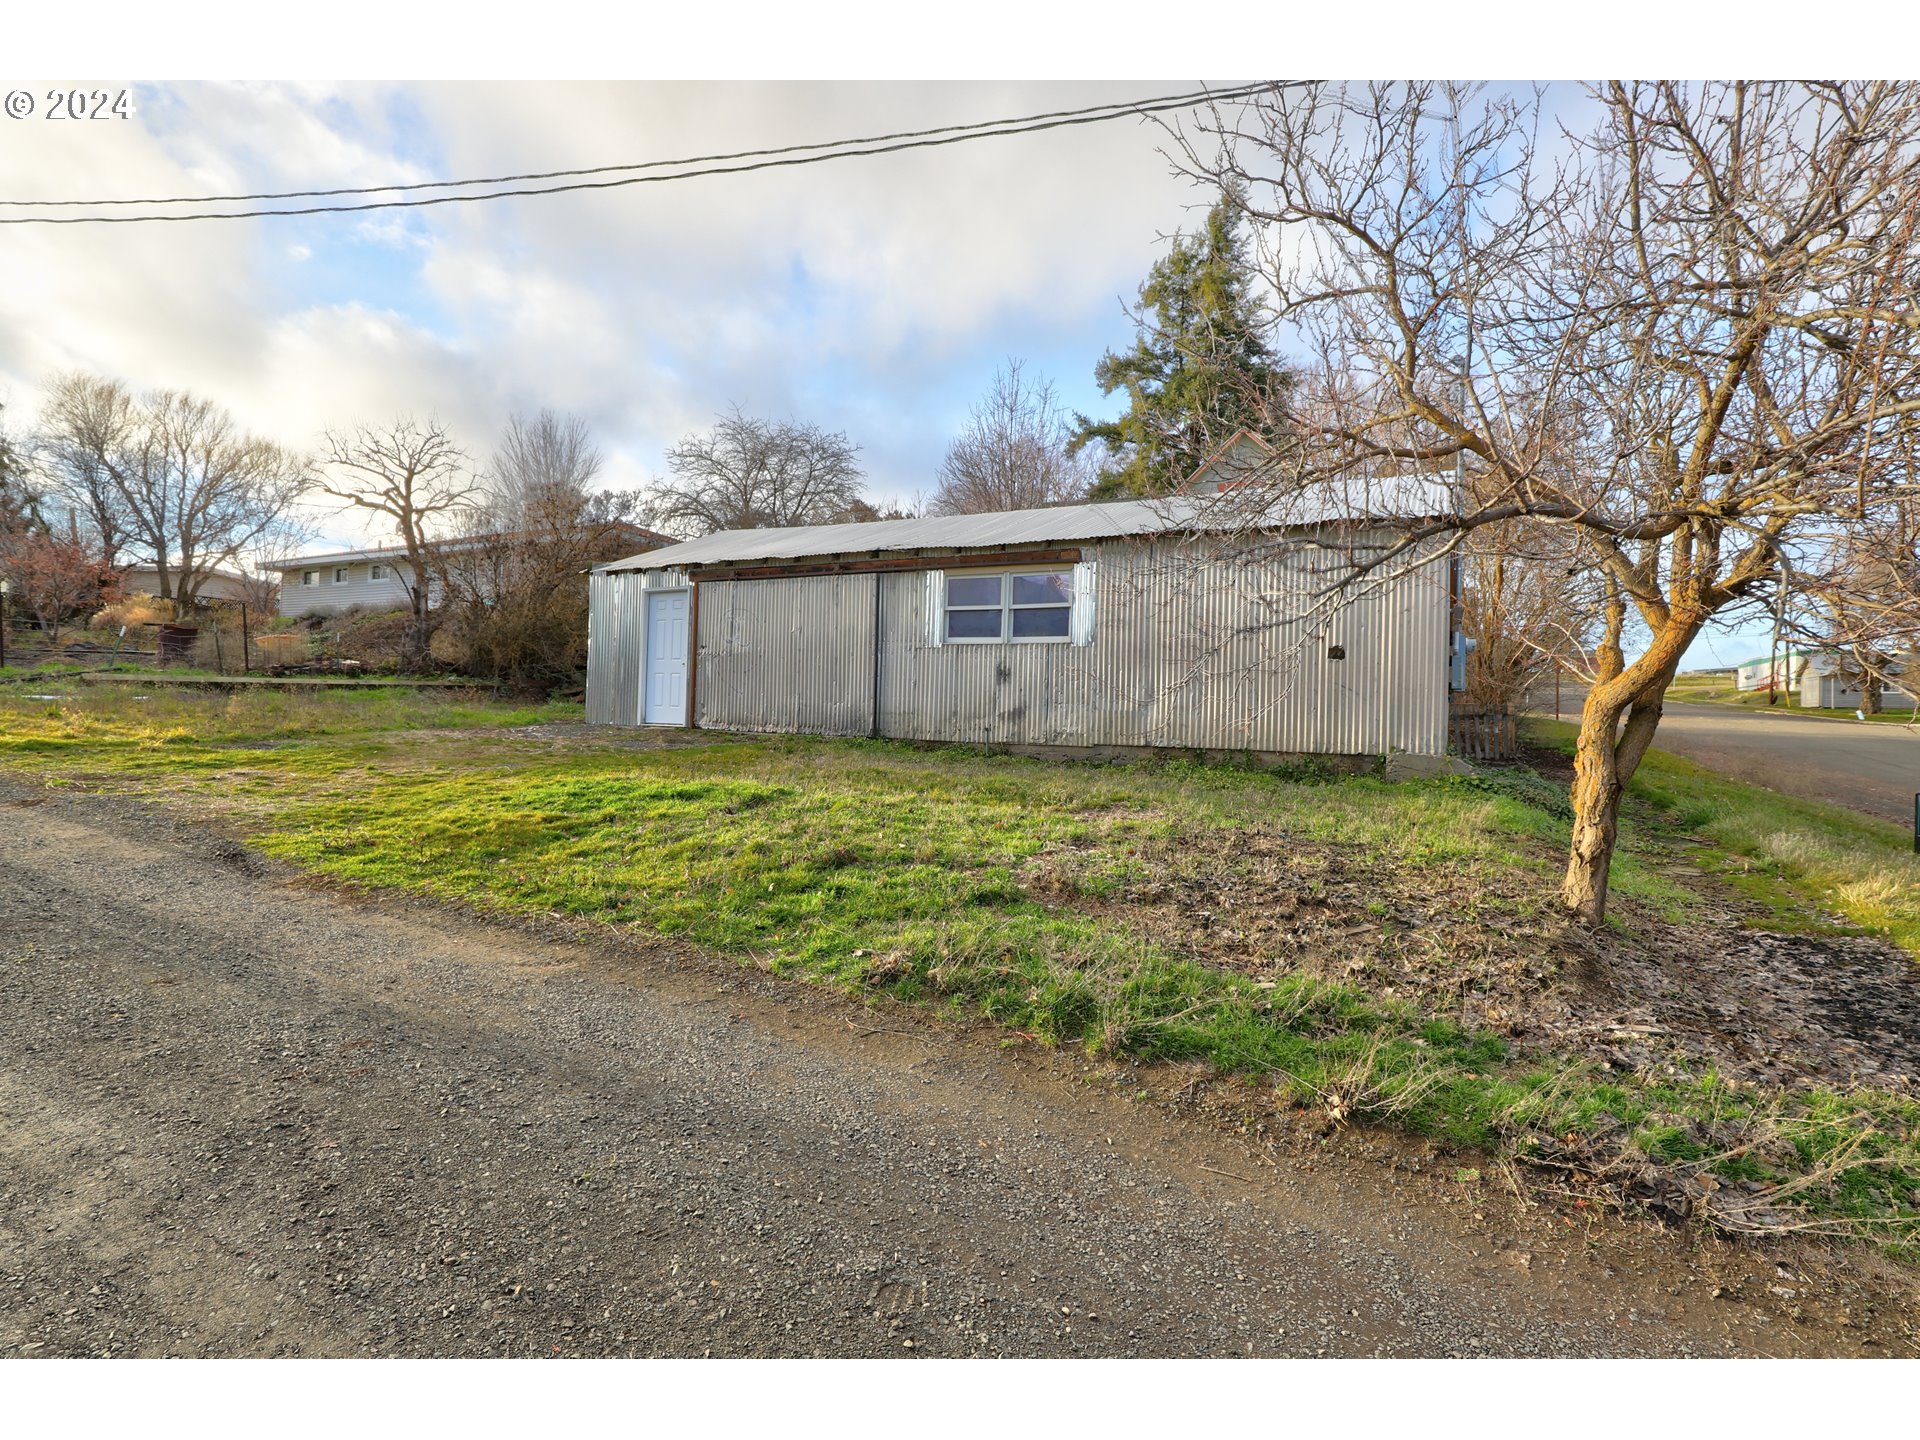 301 2nd ST, Moro, OR 97039